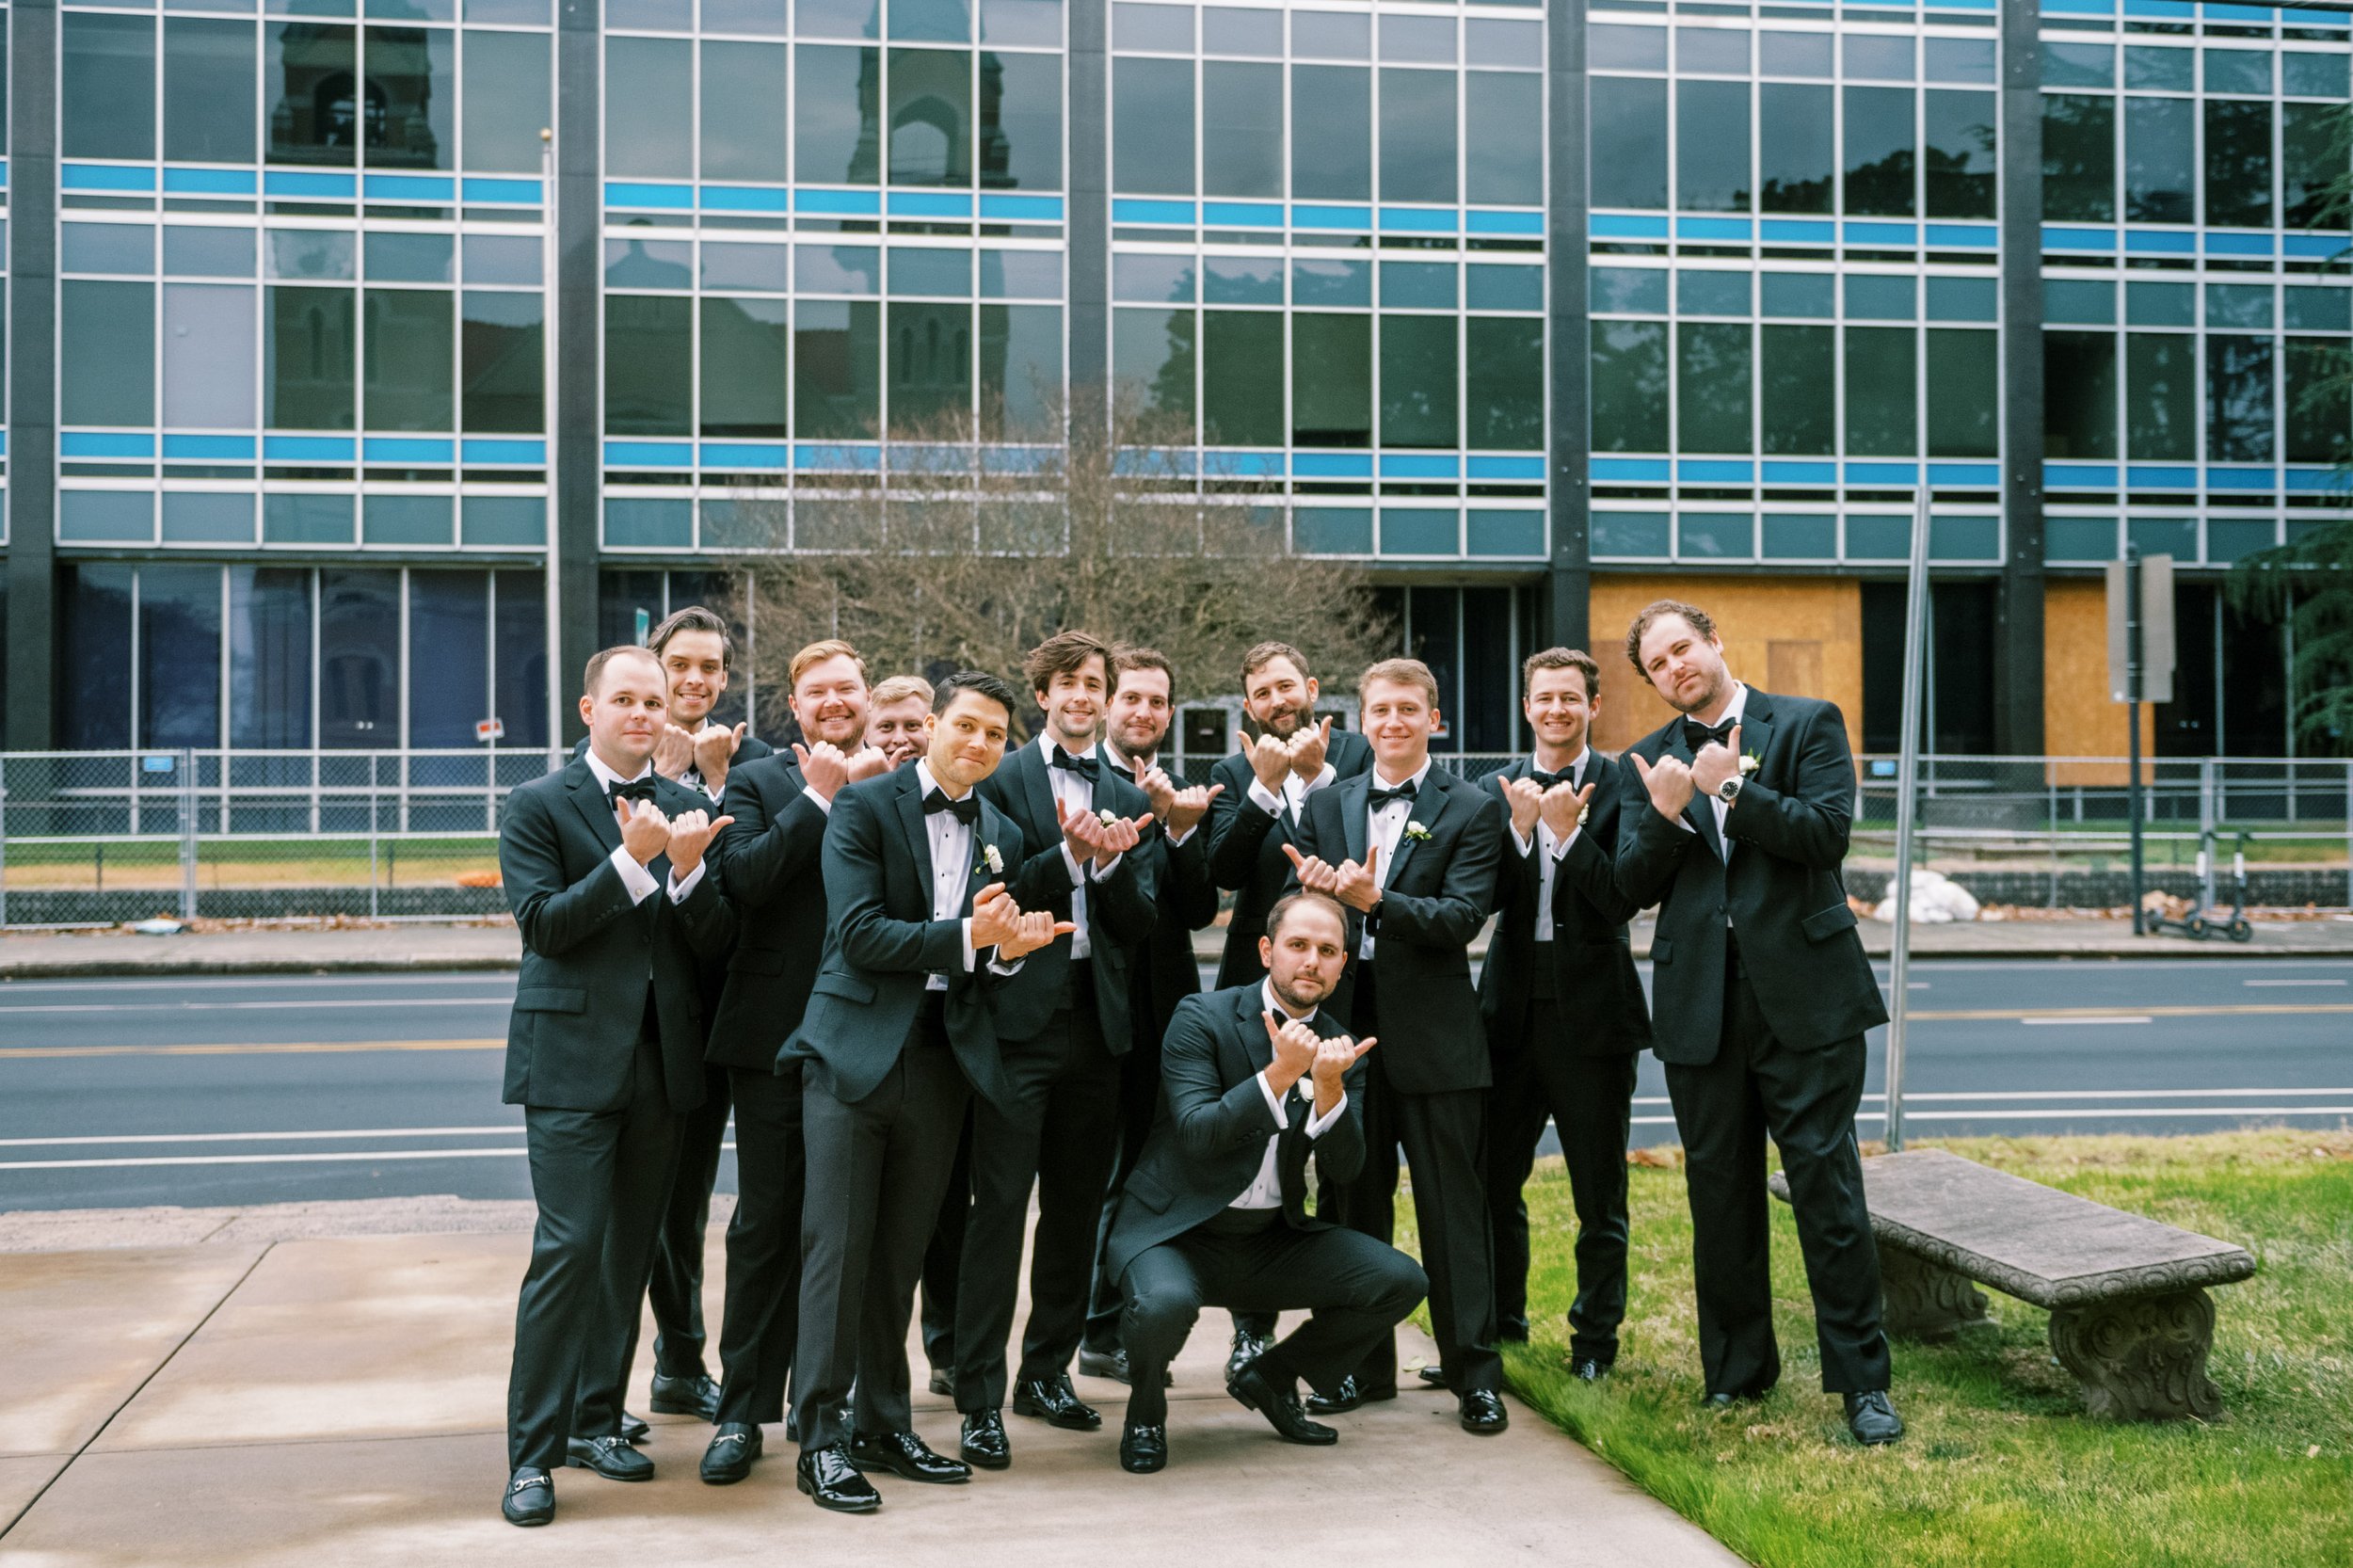 Bull City Groomsmen Wedding at The Cotton Room Durham NC Fancy This Photography